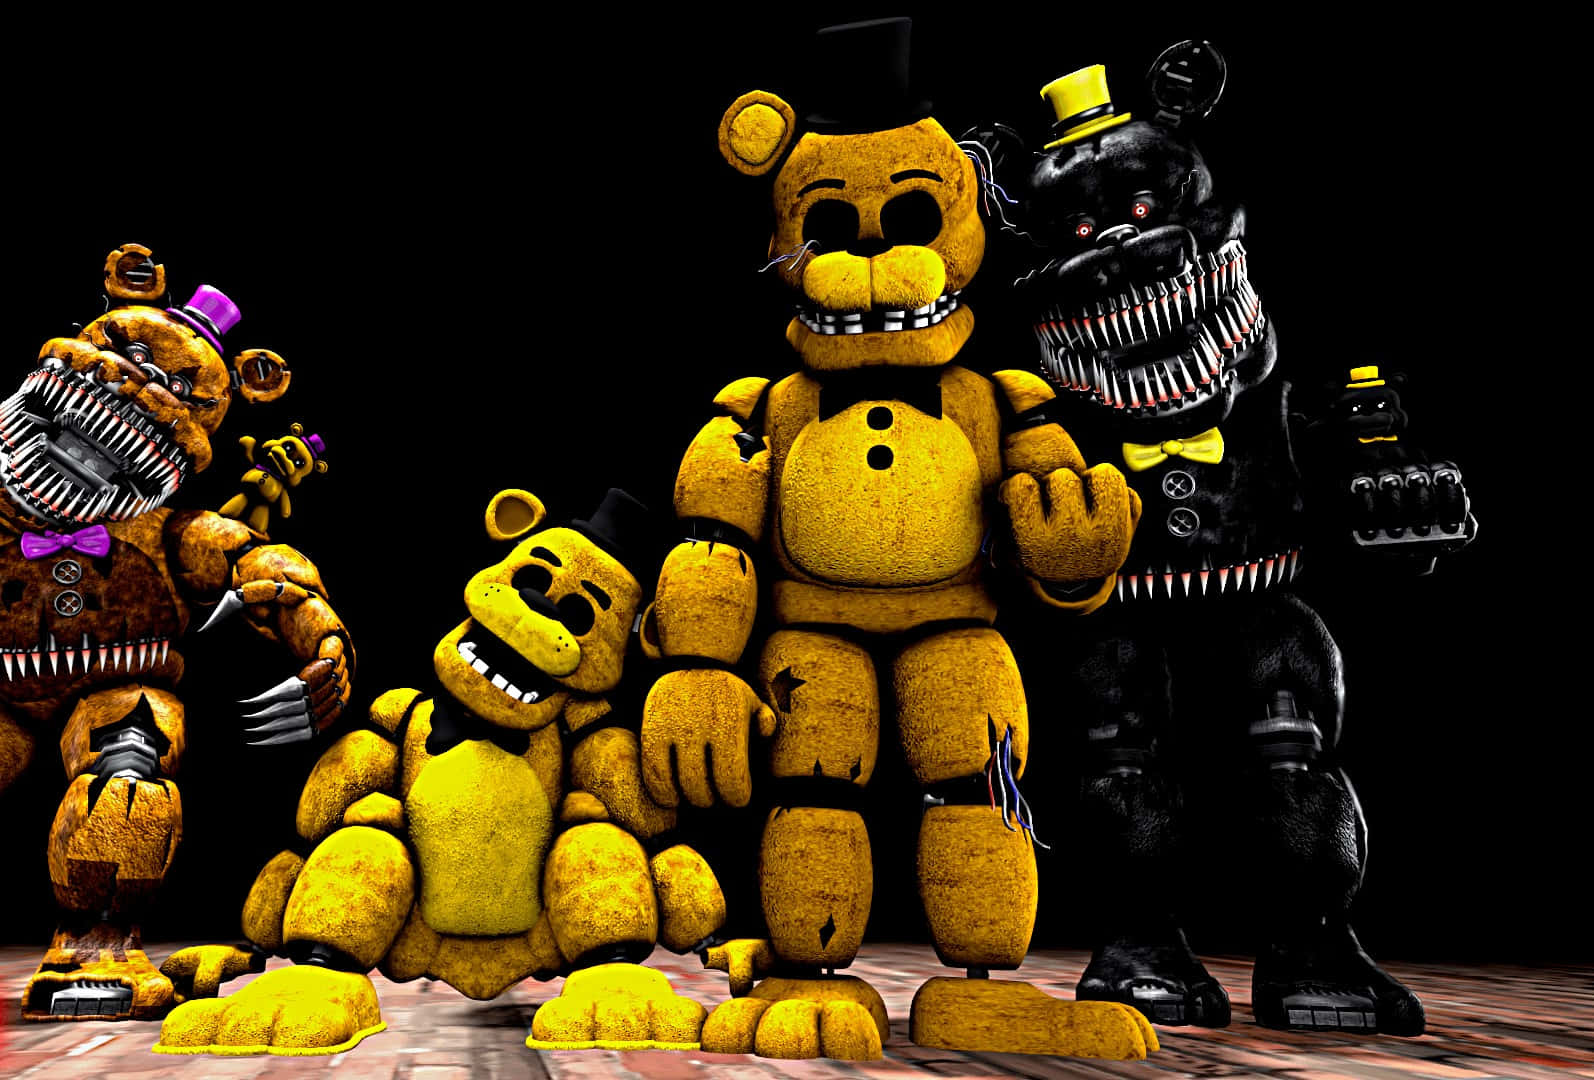 Golden Freddy from the horror game series, Five Nights at Freddy's. Wallpaper